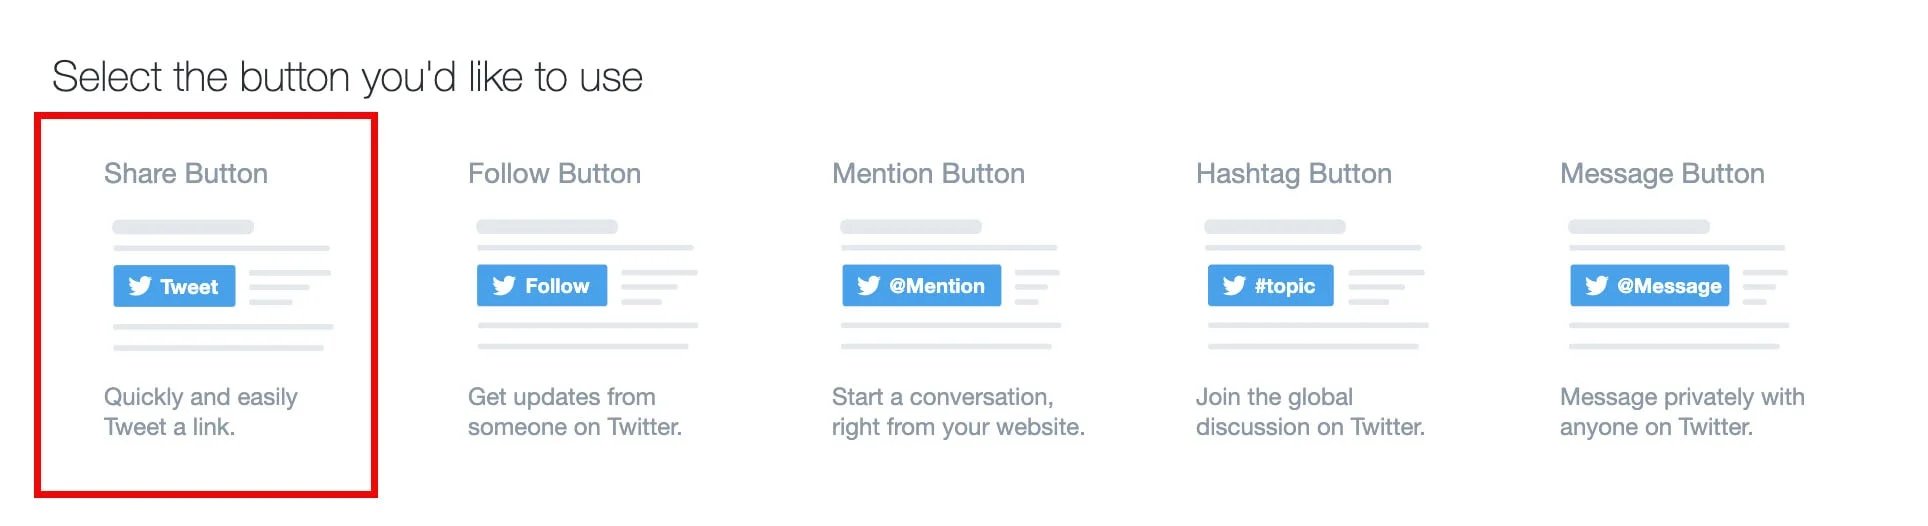 twitter share button on twitter's developer page